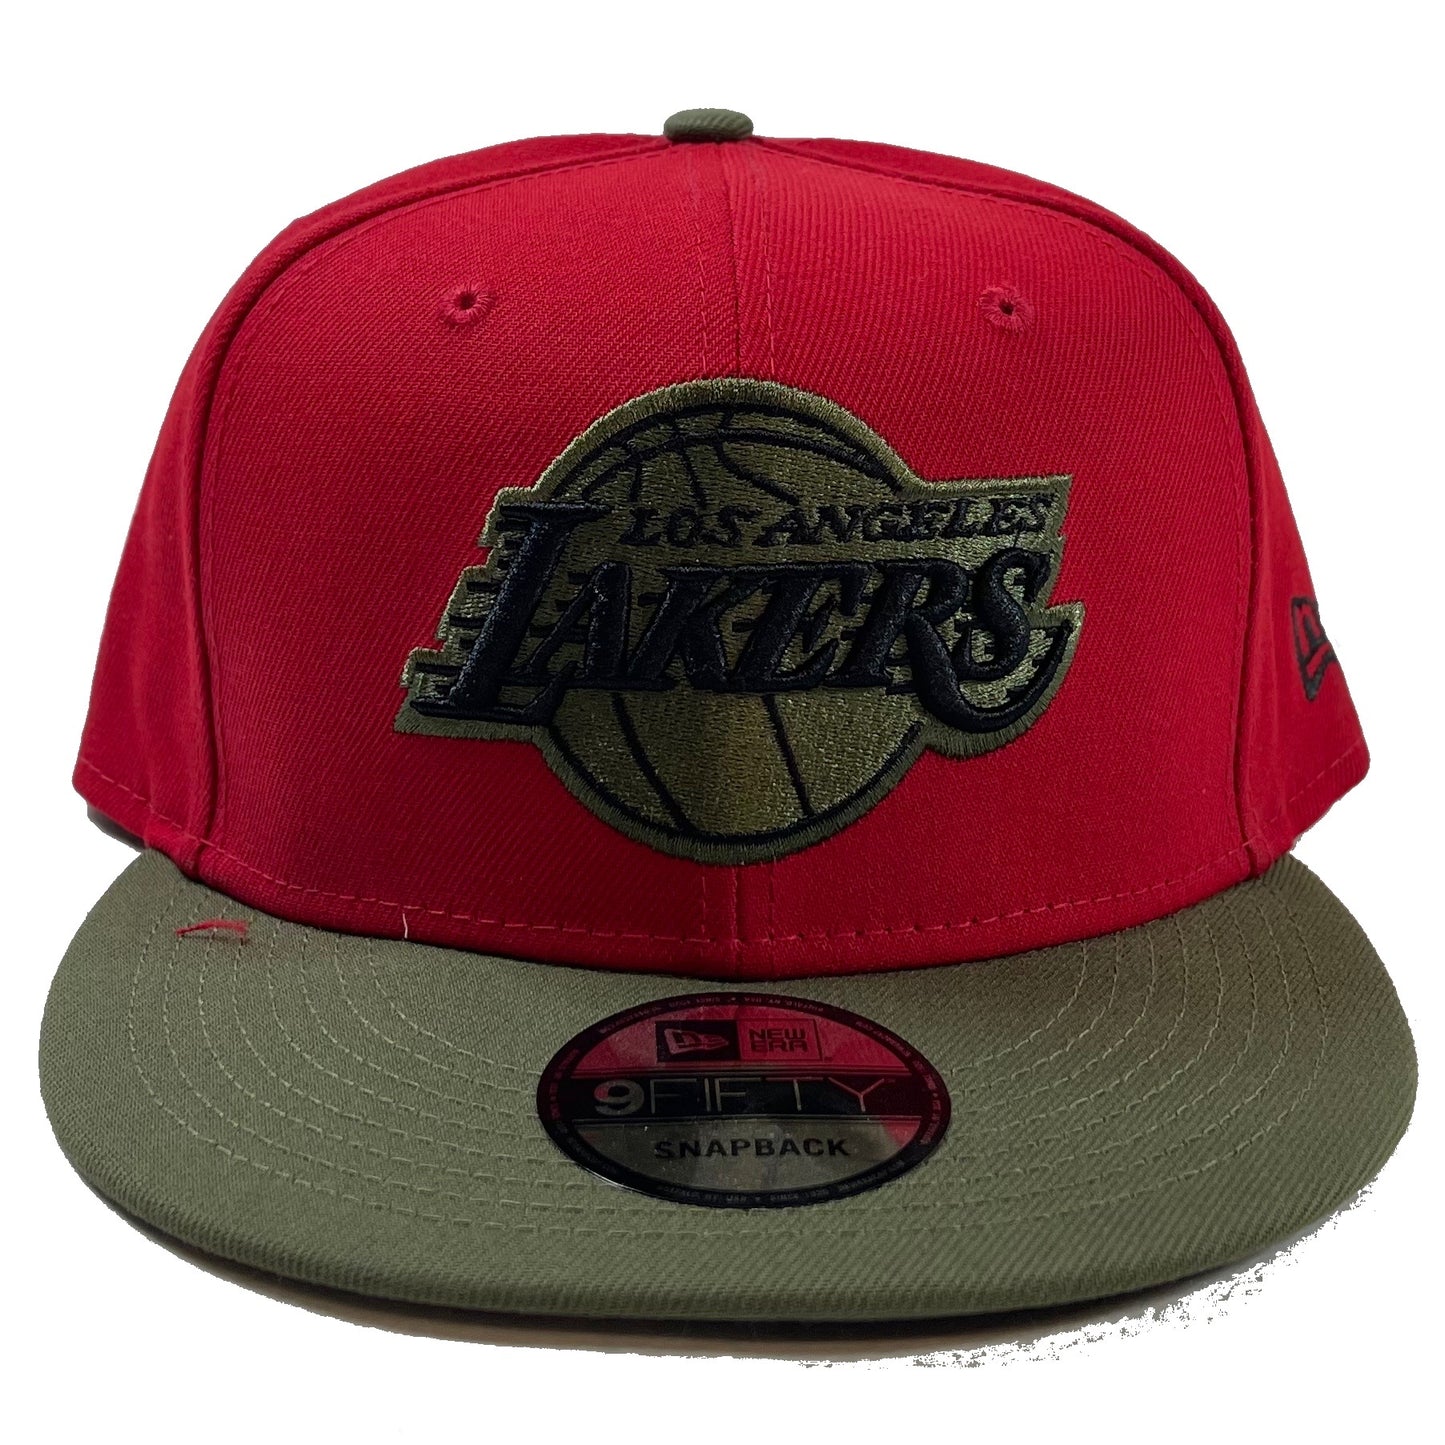 Los Angeles Lakers (Red/Army Green) Snapback